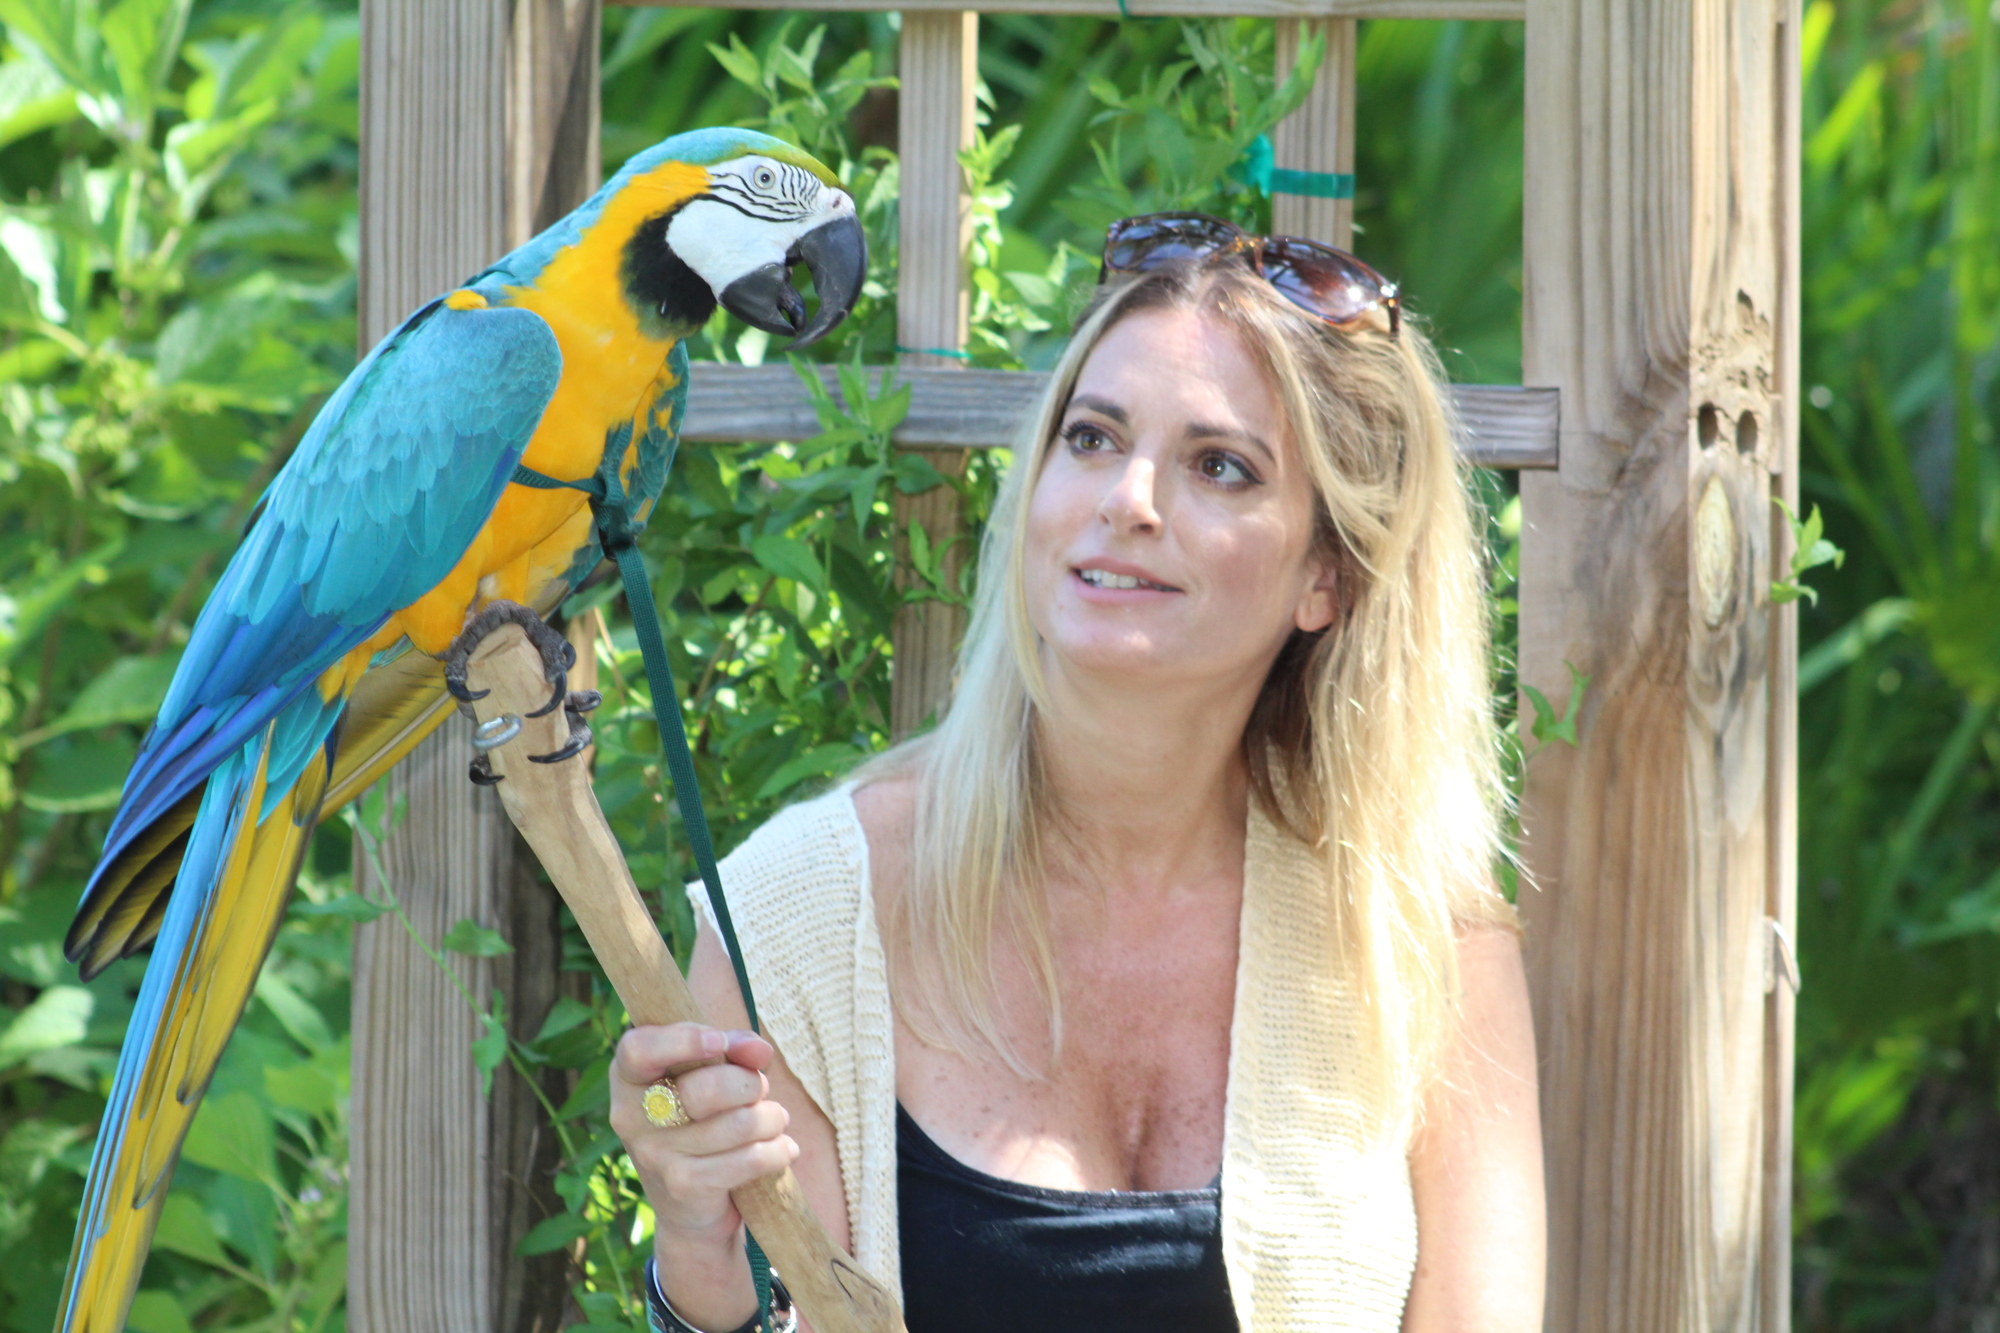 Among Tilla’s favorite outings are trips to Summerfield Park. Her owner, Angelique Still, found her at Florida Parrot Rescue.